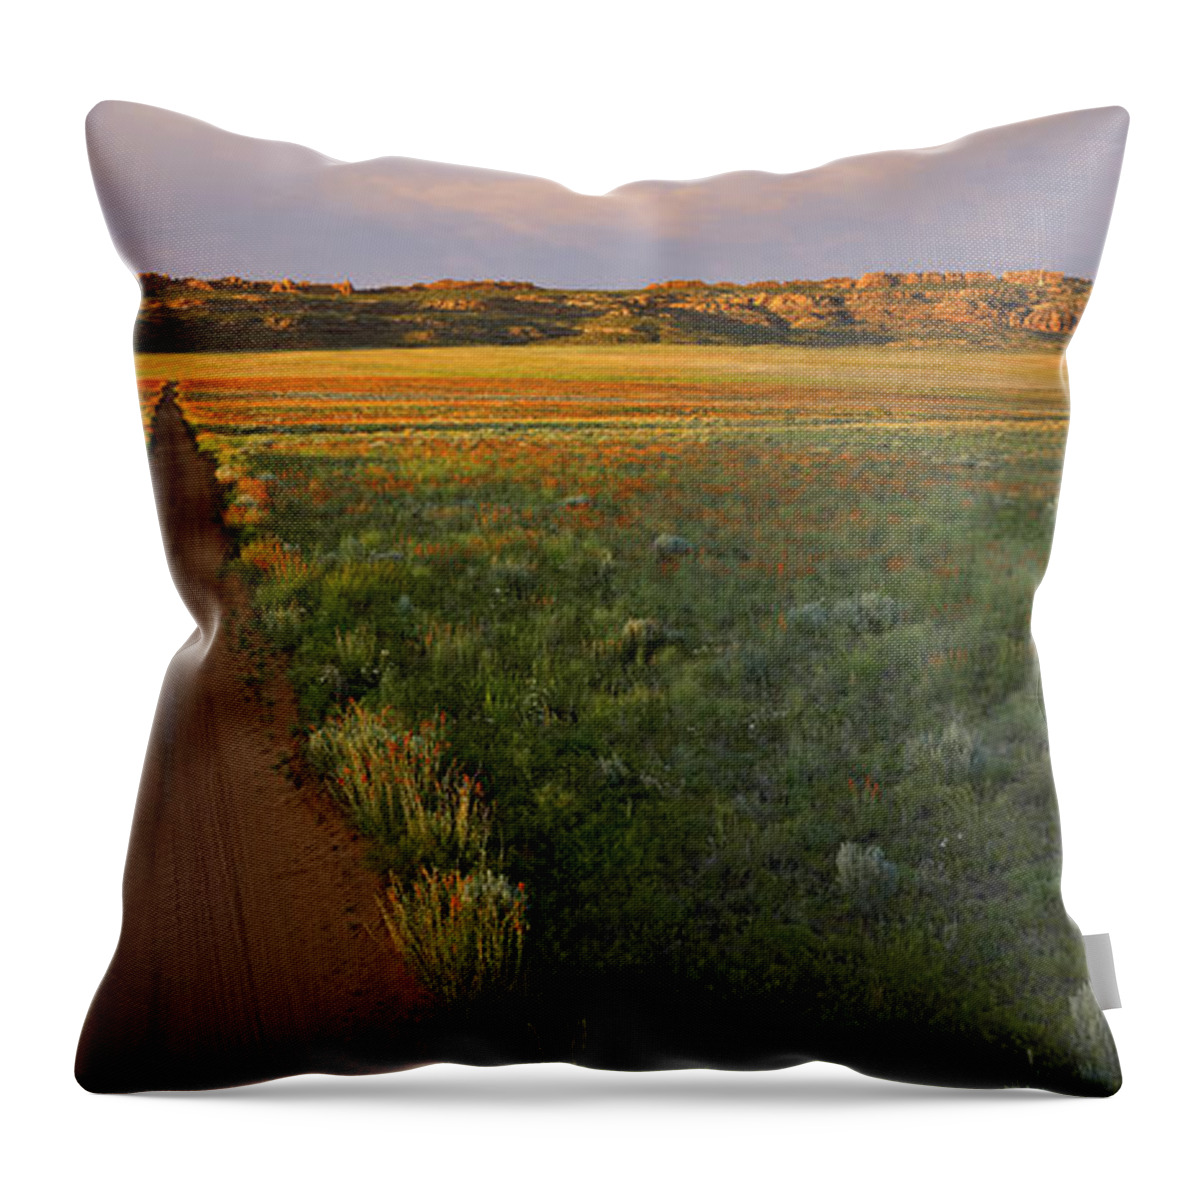 00175239 Throw Pillow featuring the photograph Globemallow Clusters And Dirt Road Salt by Tim Fitzharris